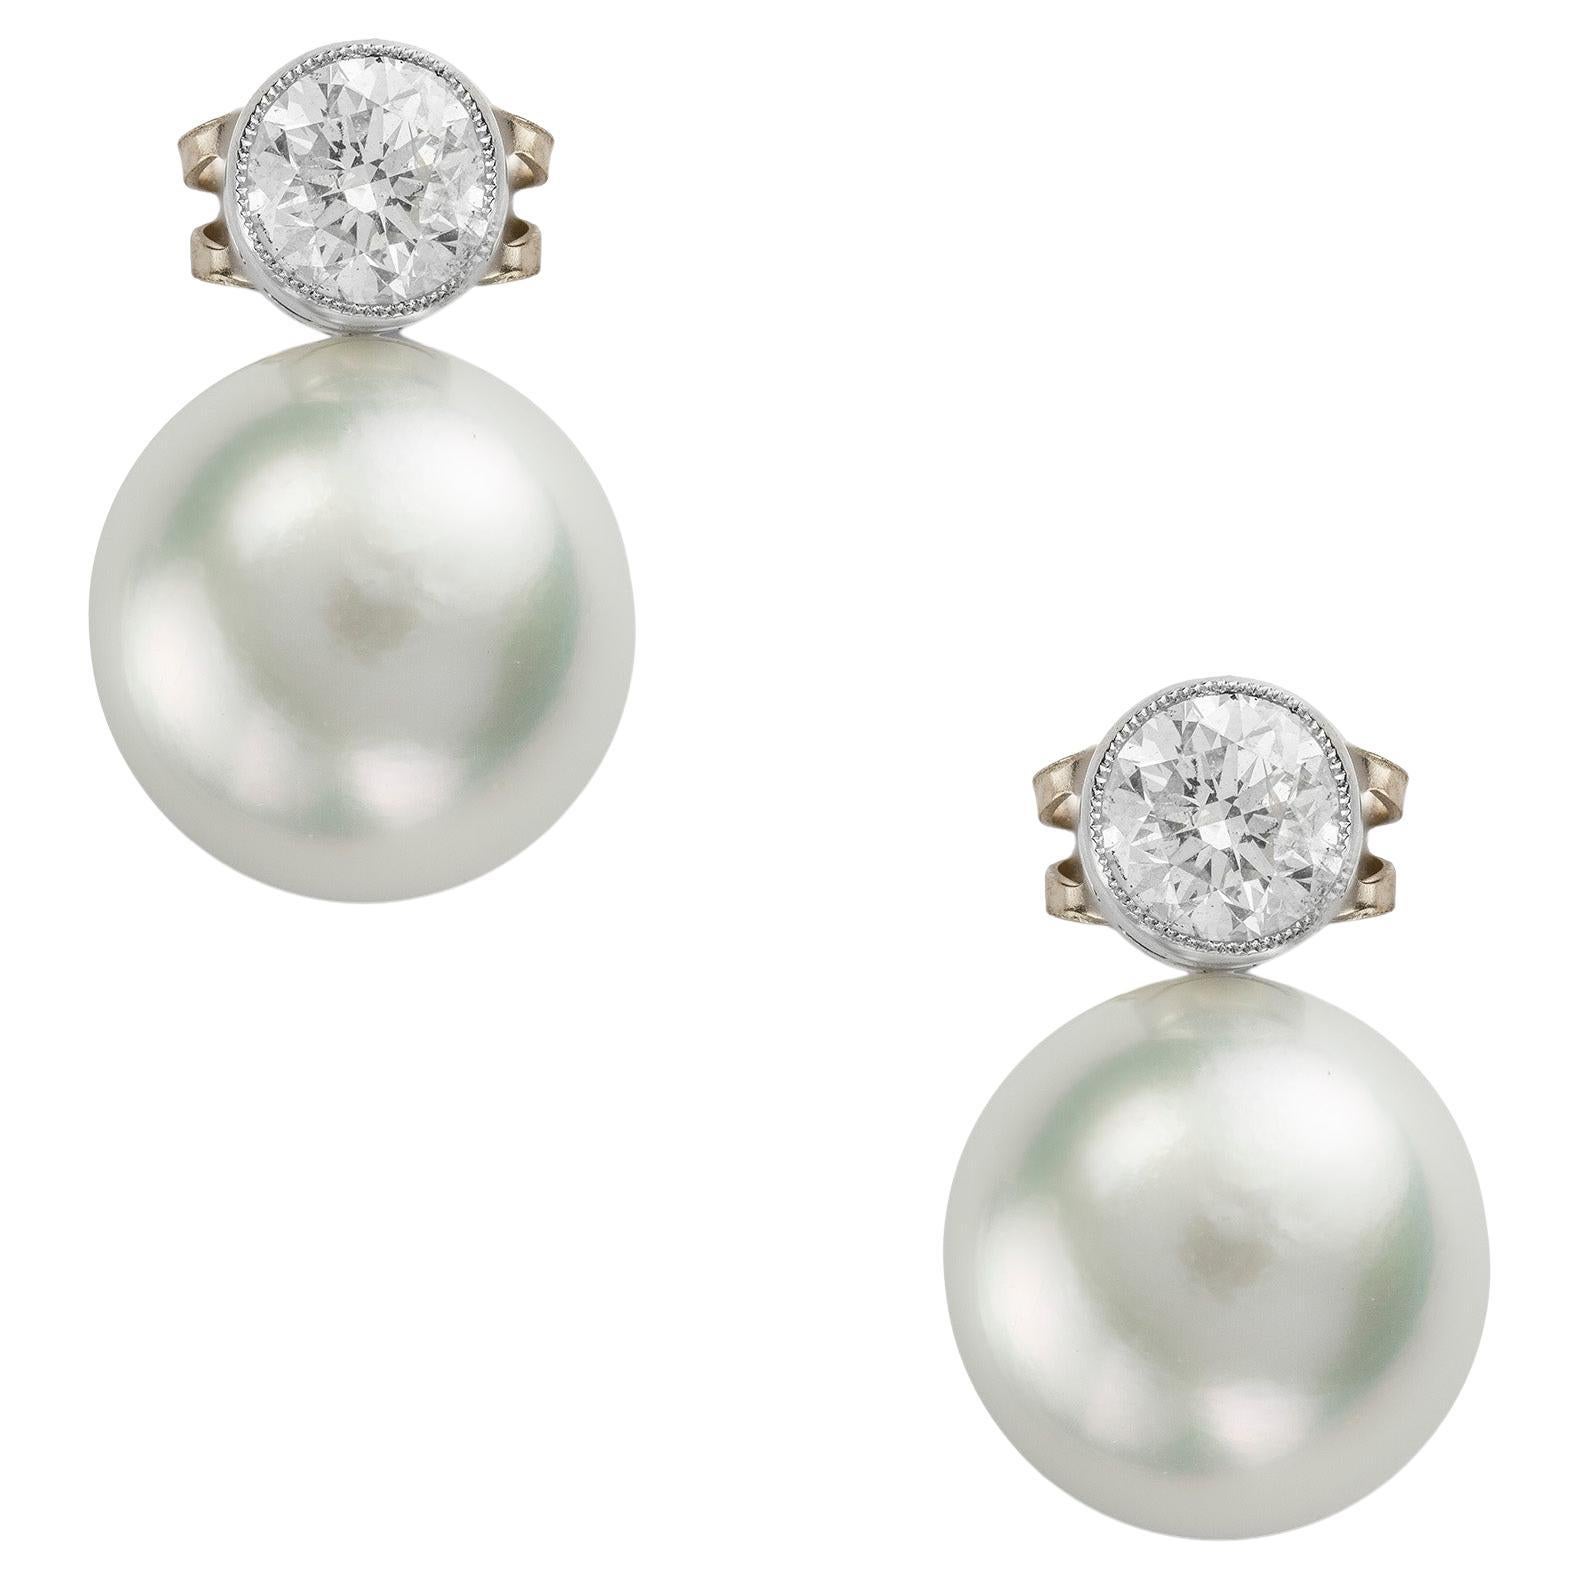 A Pair Of South Sea Cultured Pearl And Diamond Earrings